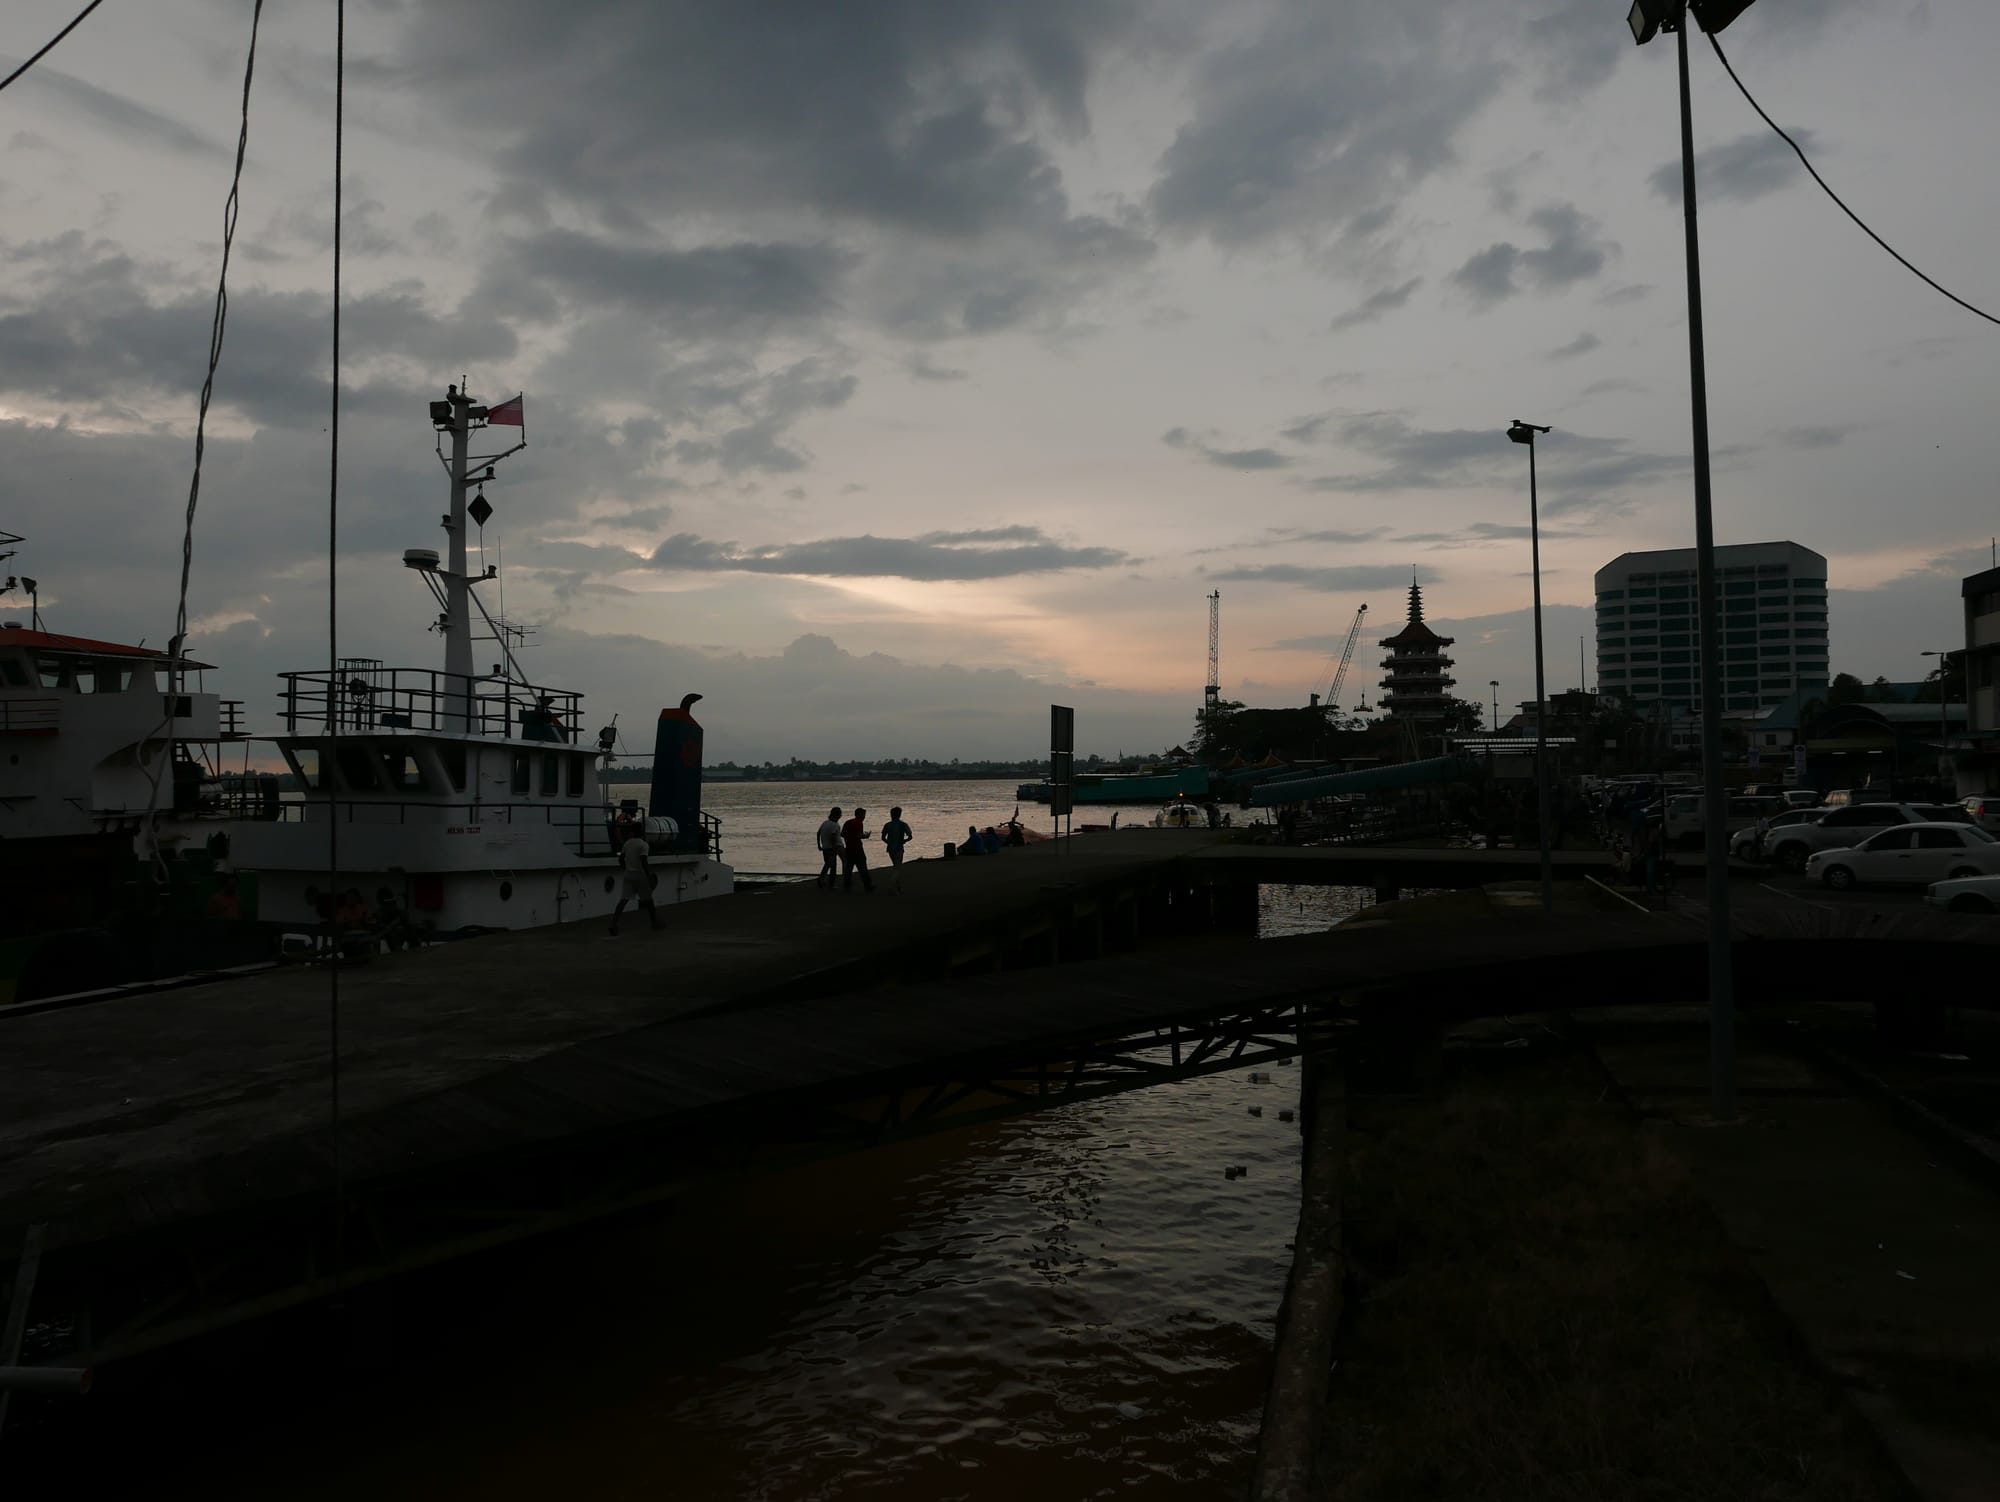 Photo by Author — dusk on the Rajang River